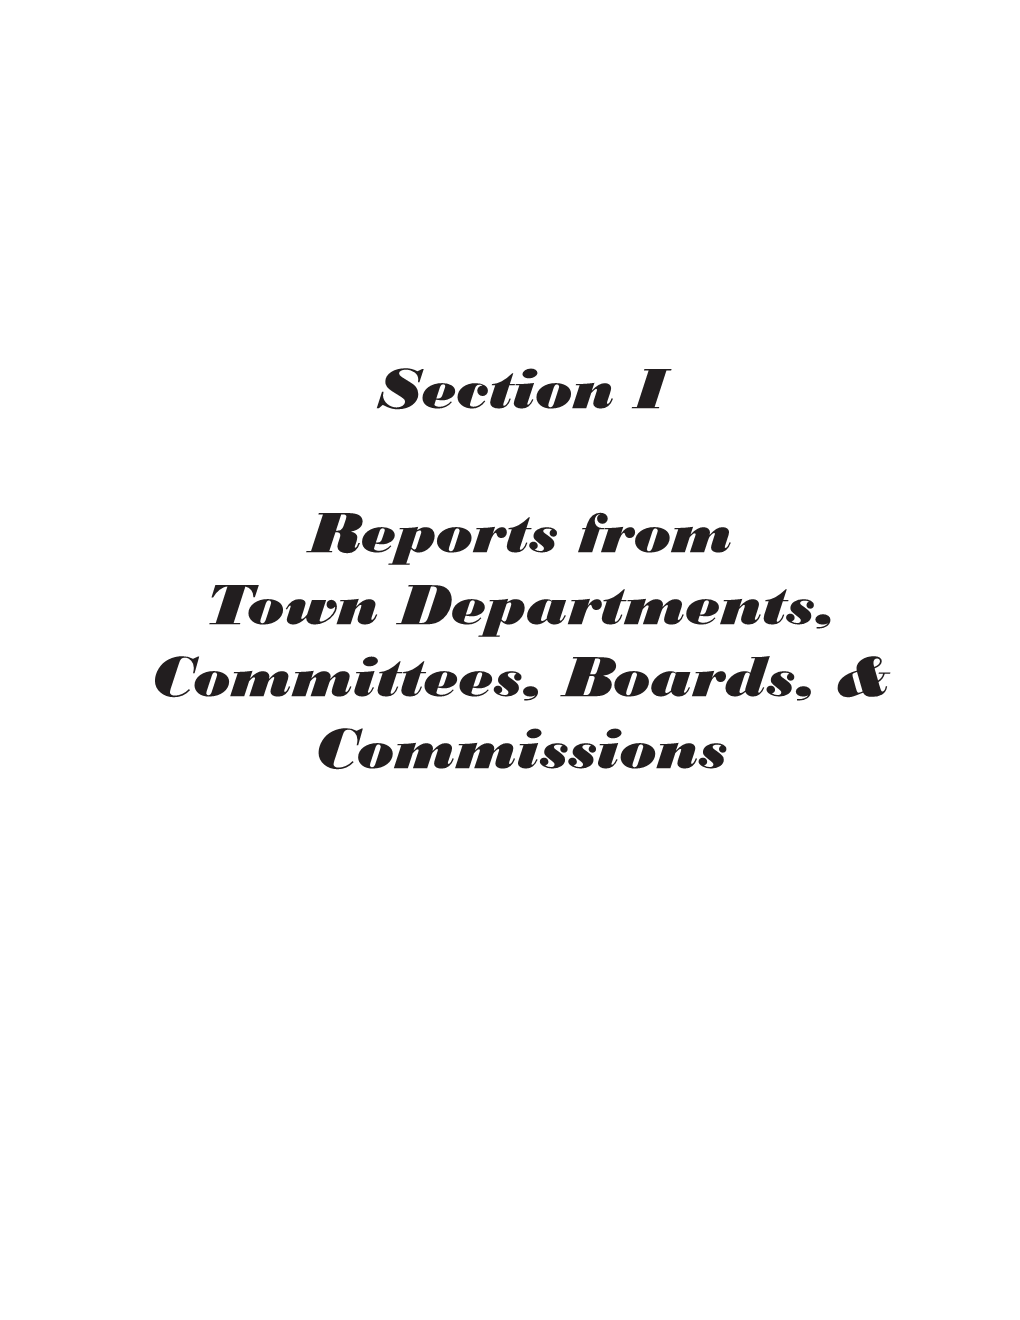 Reports from Town Departments, Committees, Boards & Commissions